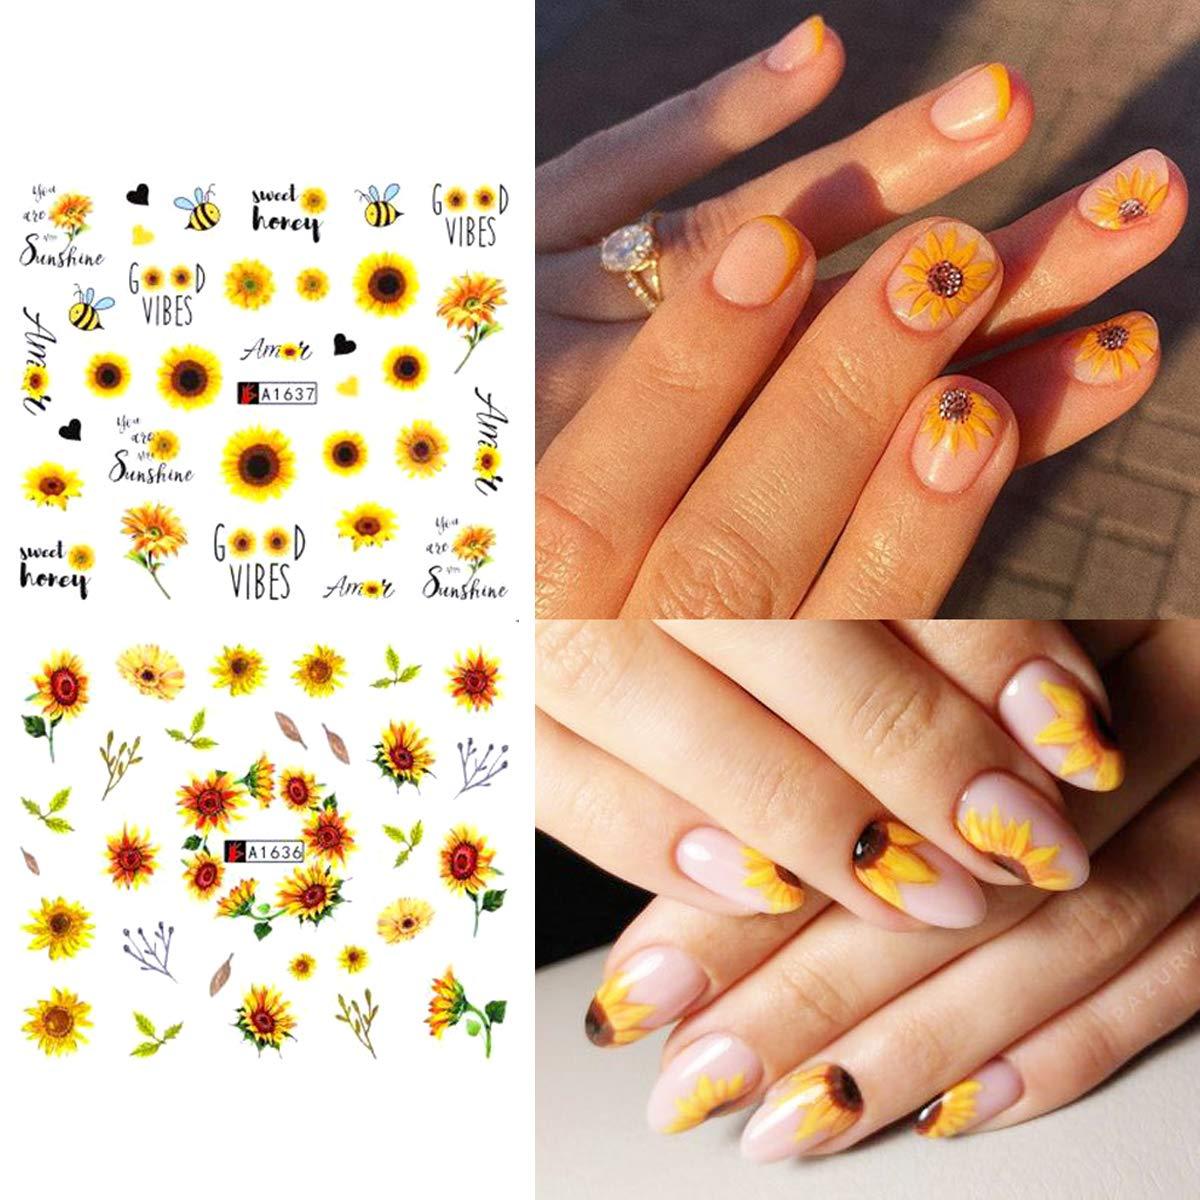 Buy S.A.V.I Nail Art Palette Five Petal Small Flower Decorations, 12 Grids  Box Resin, Nail decorations Art Accessories Jewelry DIY For Manicure Design  Accessories Online at Low Prices in India - Amazon.in